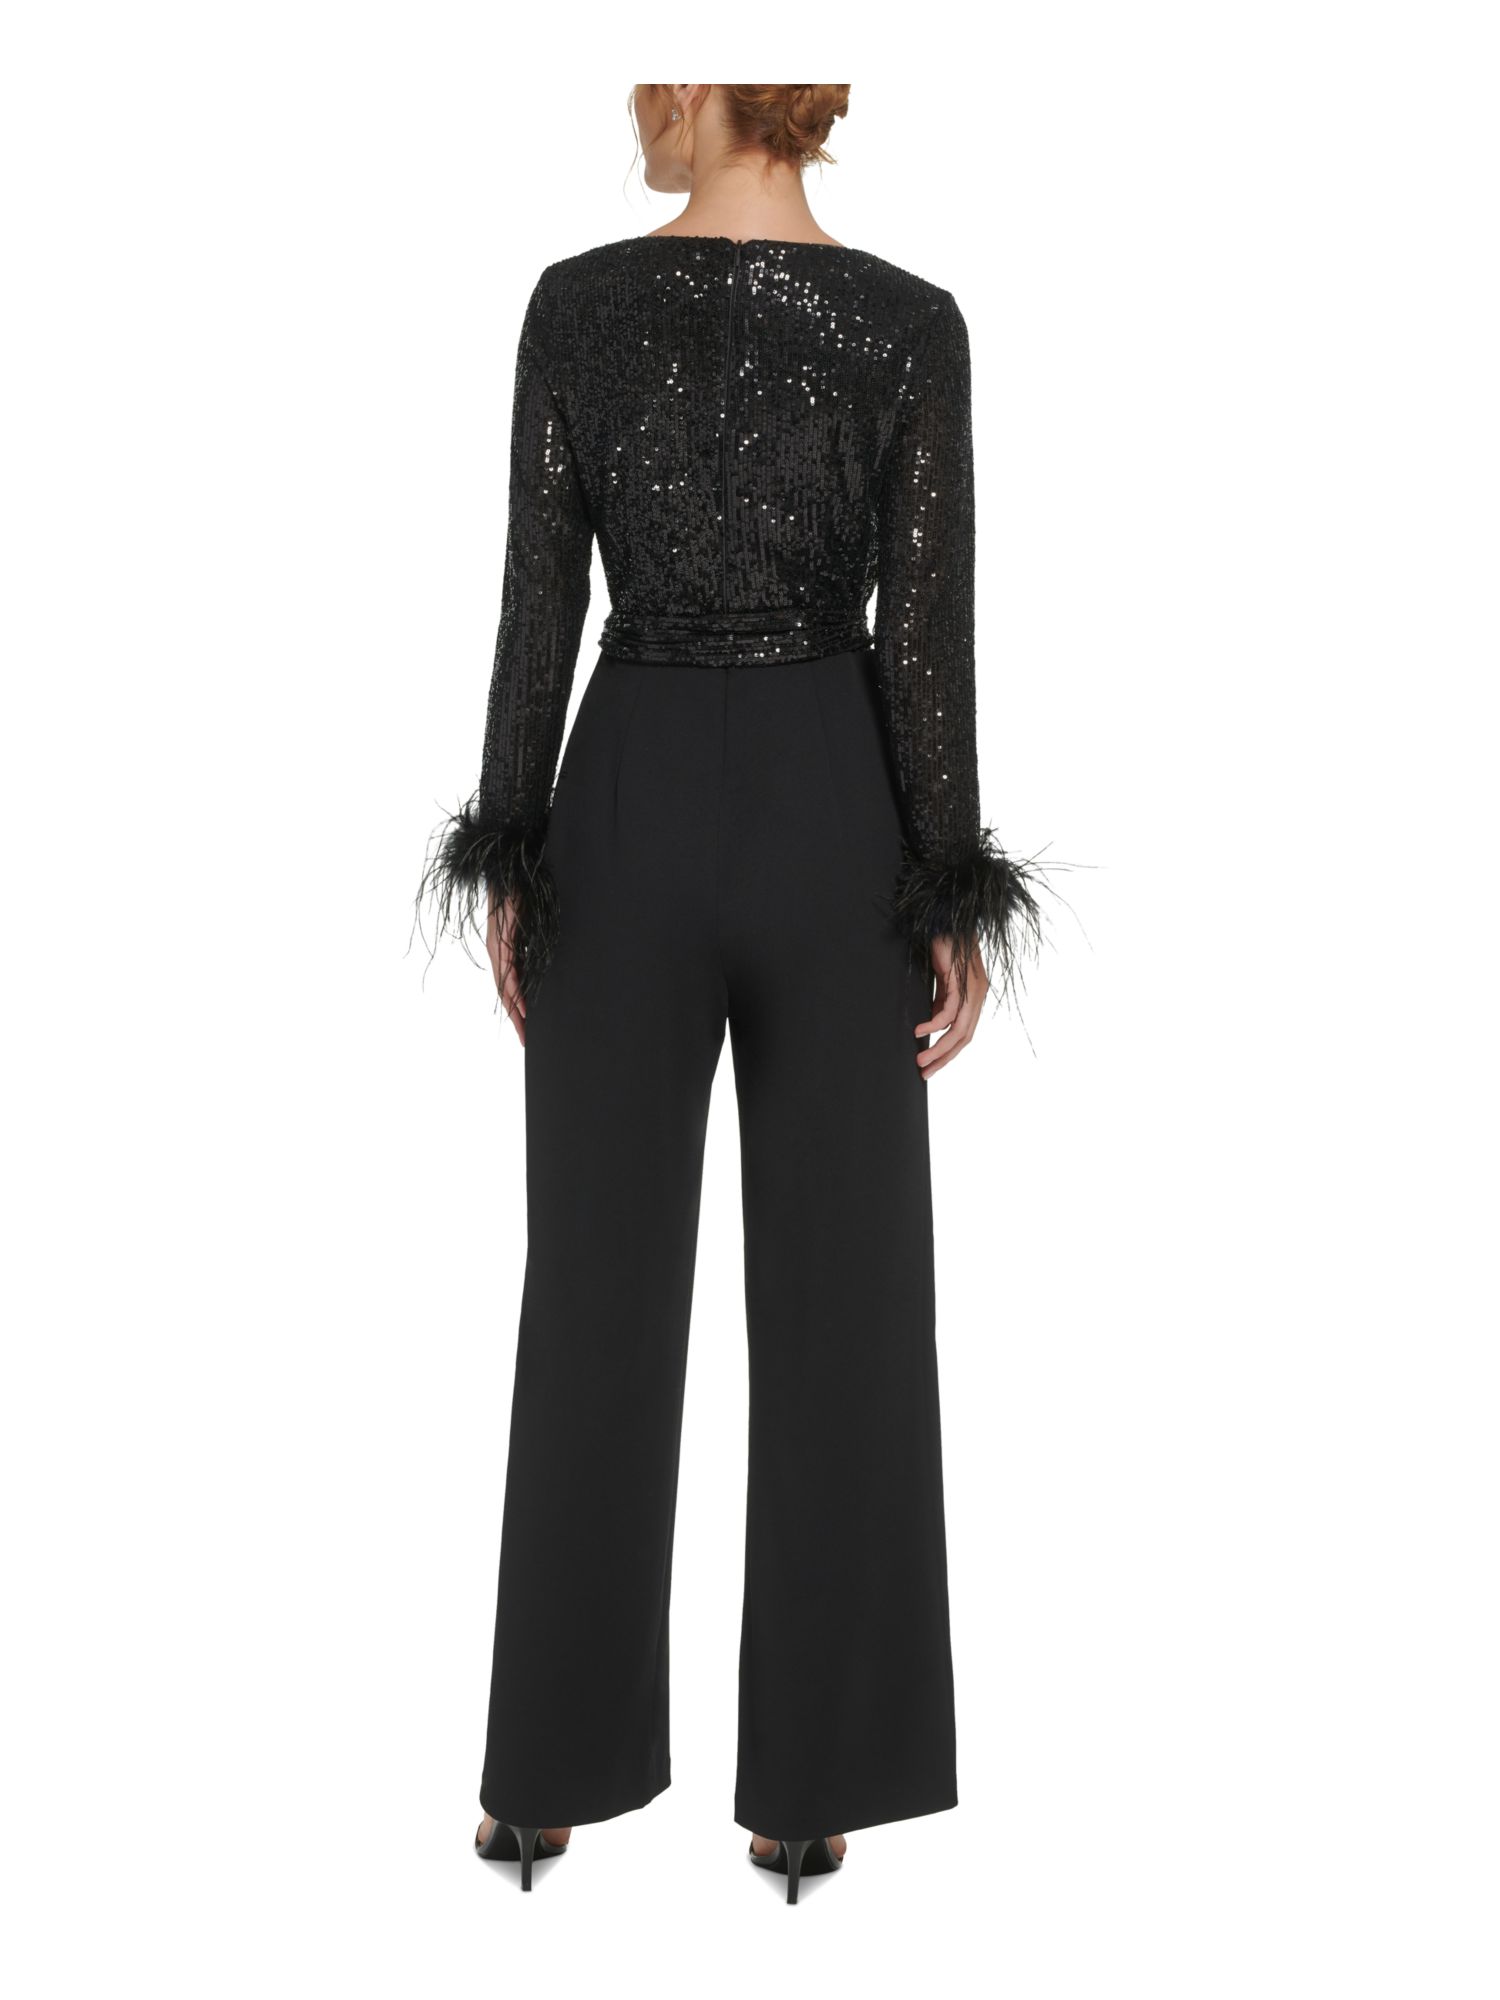 ELIZA J Womens Black Sequined Zippered Feather Cuffs Tie-Belt Long Sleeve V Neck Cocktail Straight leg Jumpsuit 4